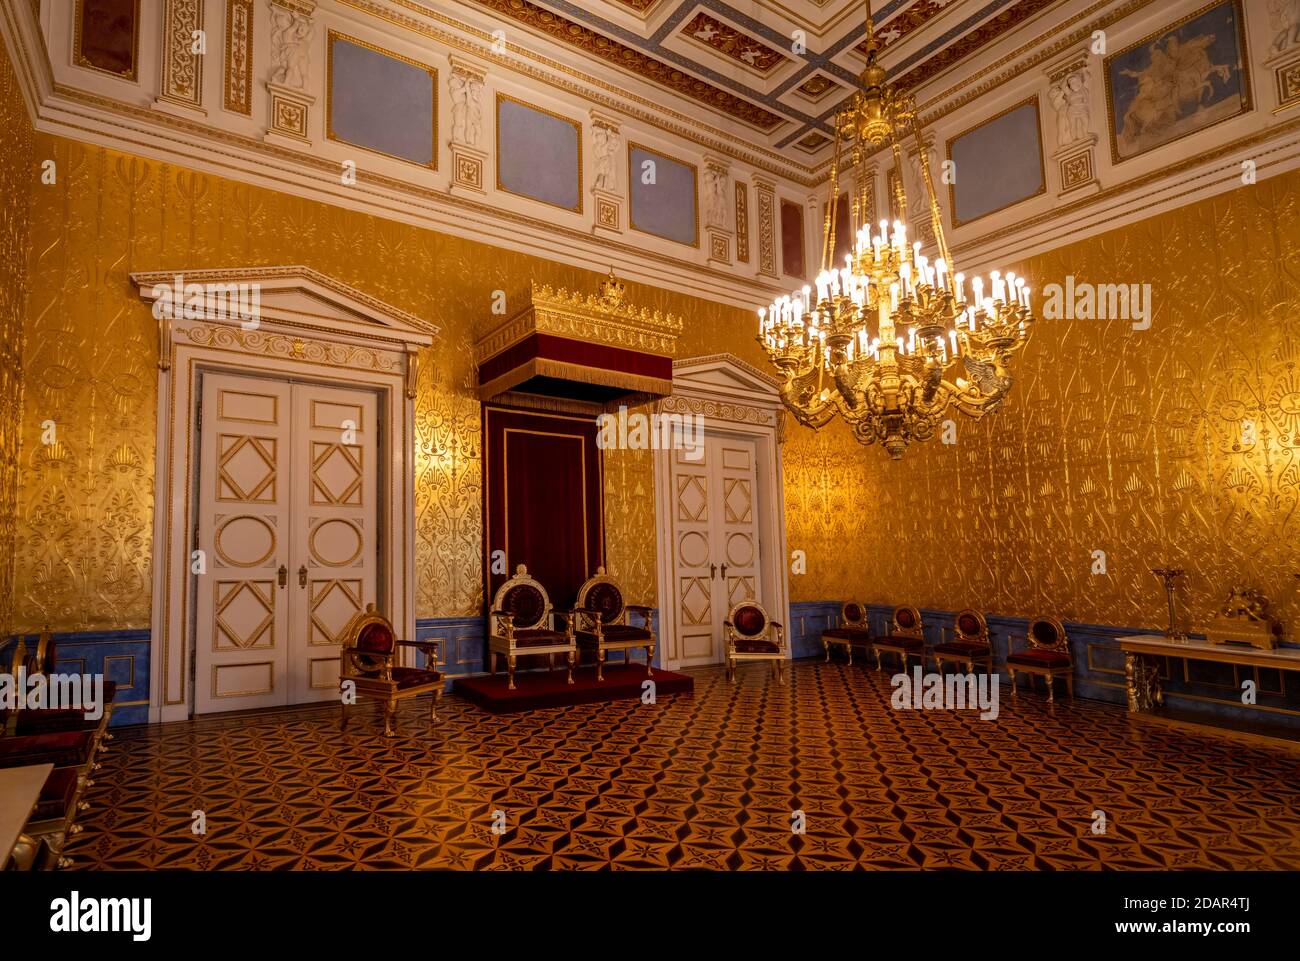 Throne for King and Queen, Koenigsbau, apartments of the King and Queen, Munich Residence, Munich, Upper Bavaria, Bavaria, Germany Stock Photo